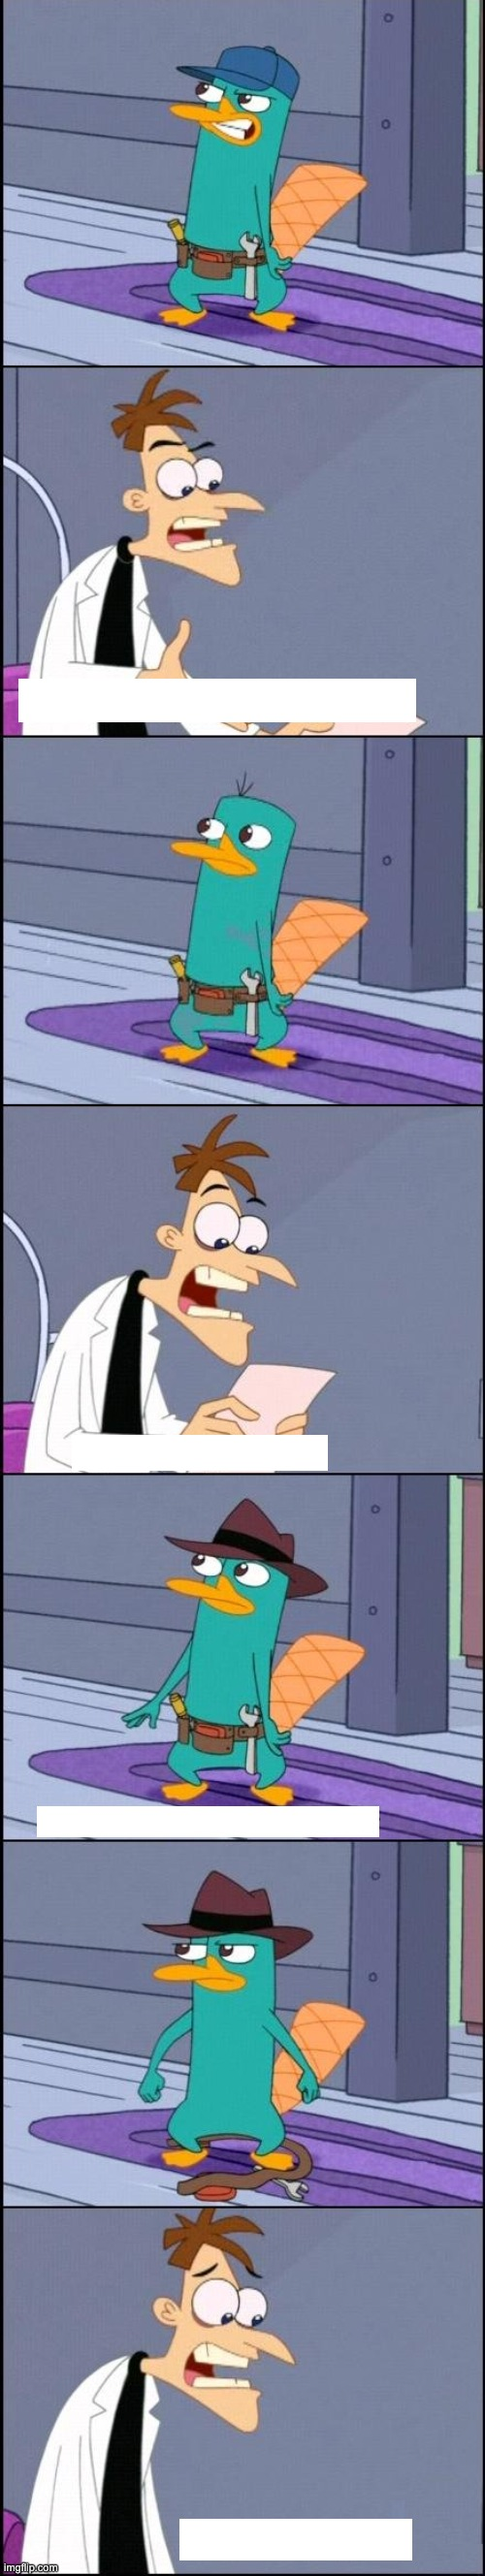 High Quality Perry the Platypus Plumber Blank Meme Template